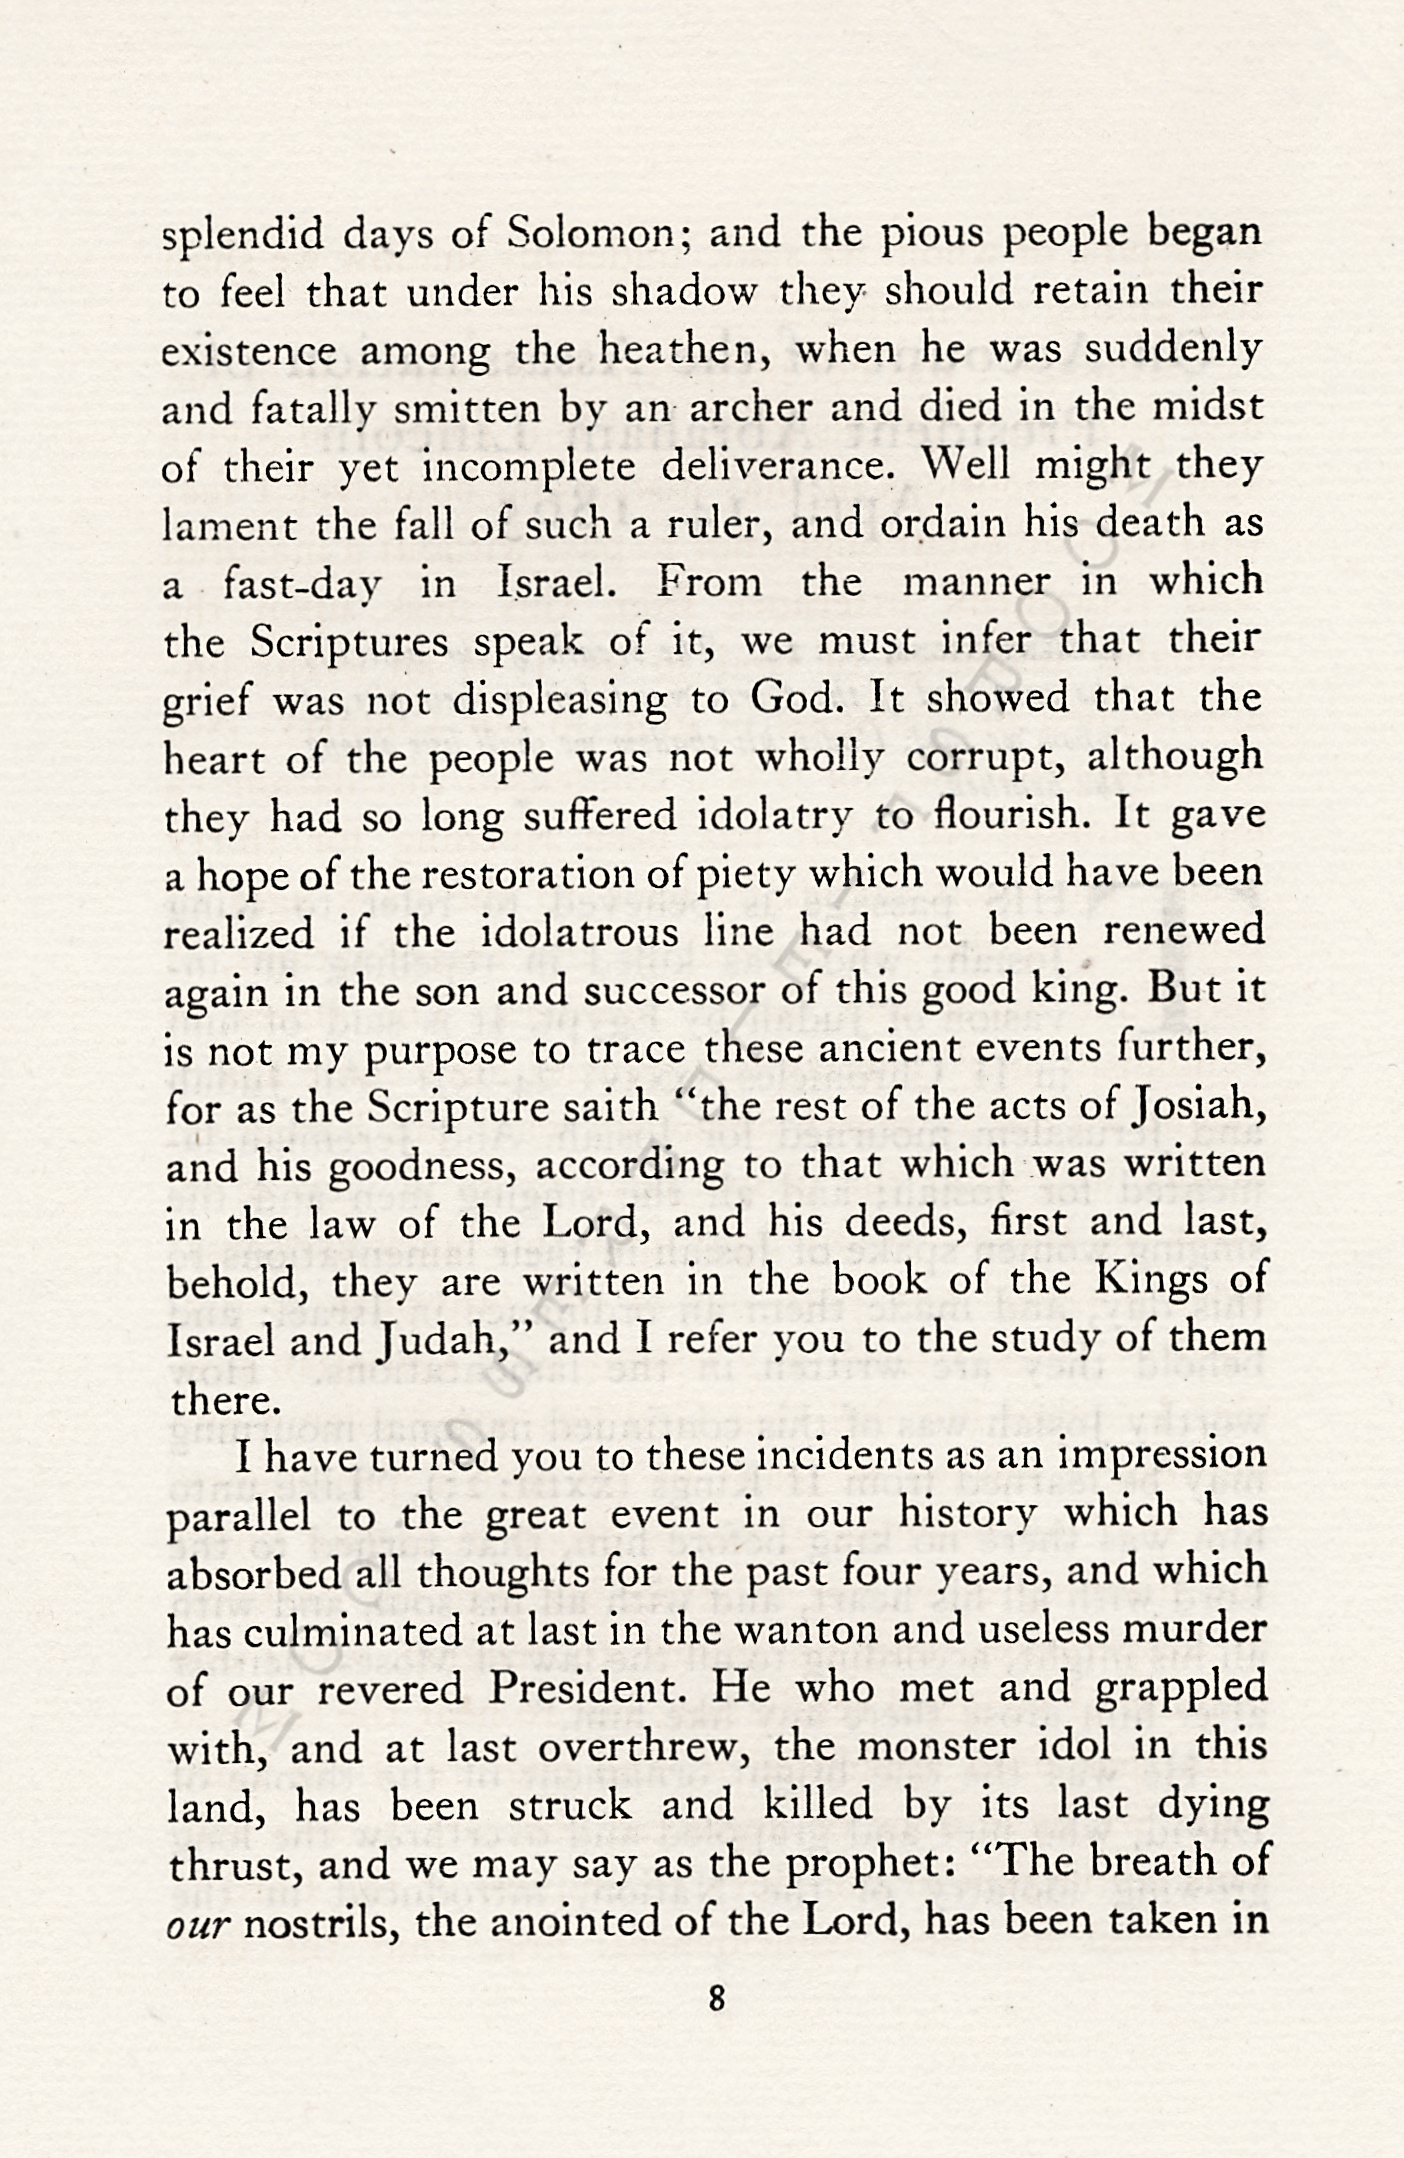 ON ACCOUNT
                      OF THE ASSASSINATION OF PRESIDENT LINCOLN BY
                      MORTIMER BLAKE